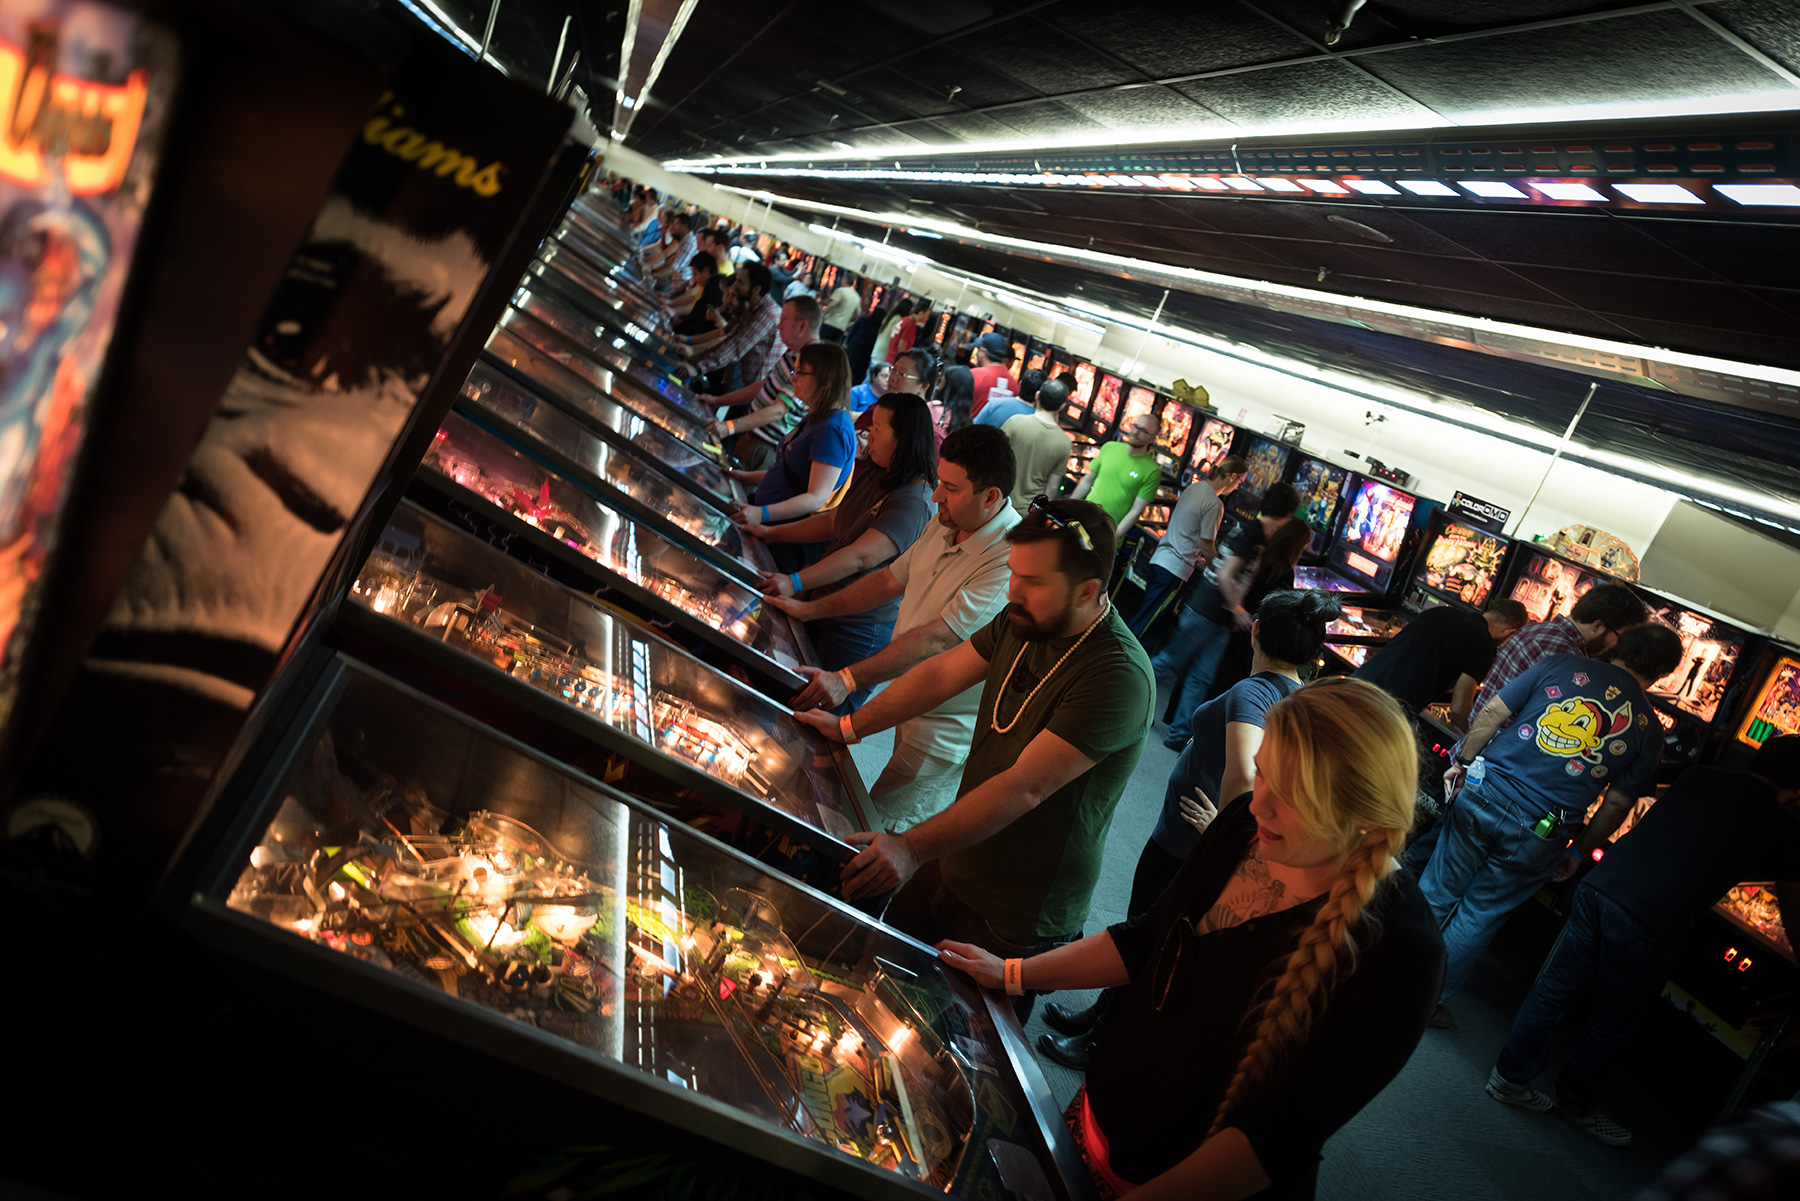 Pinball museum component of revival